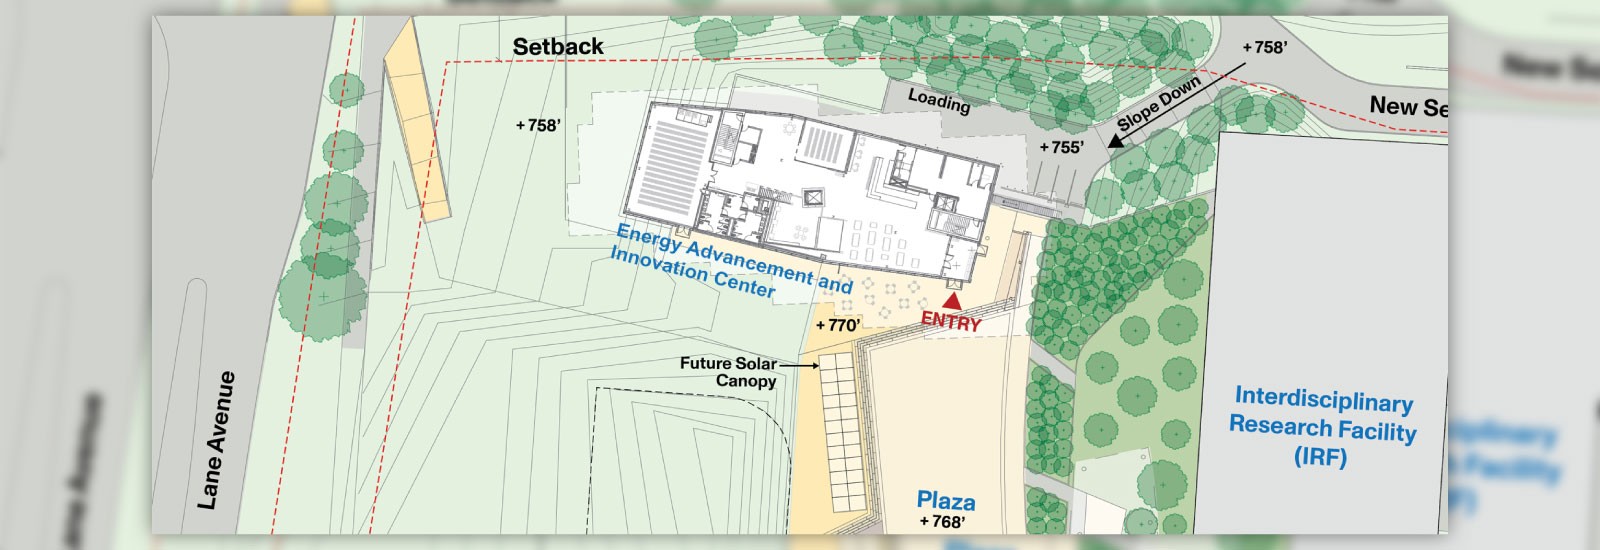 Architecture drawing of the Energy Advancement and Innovation Center